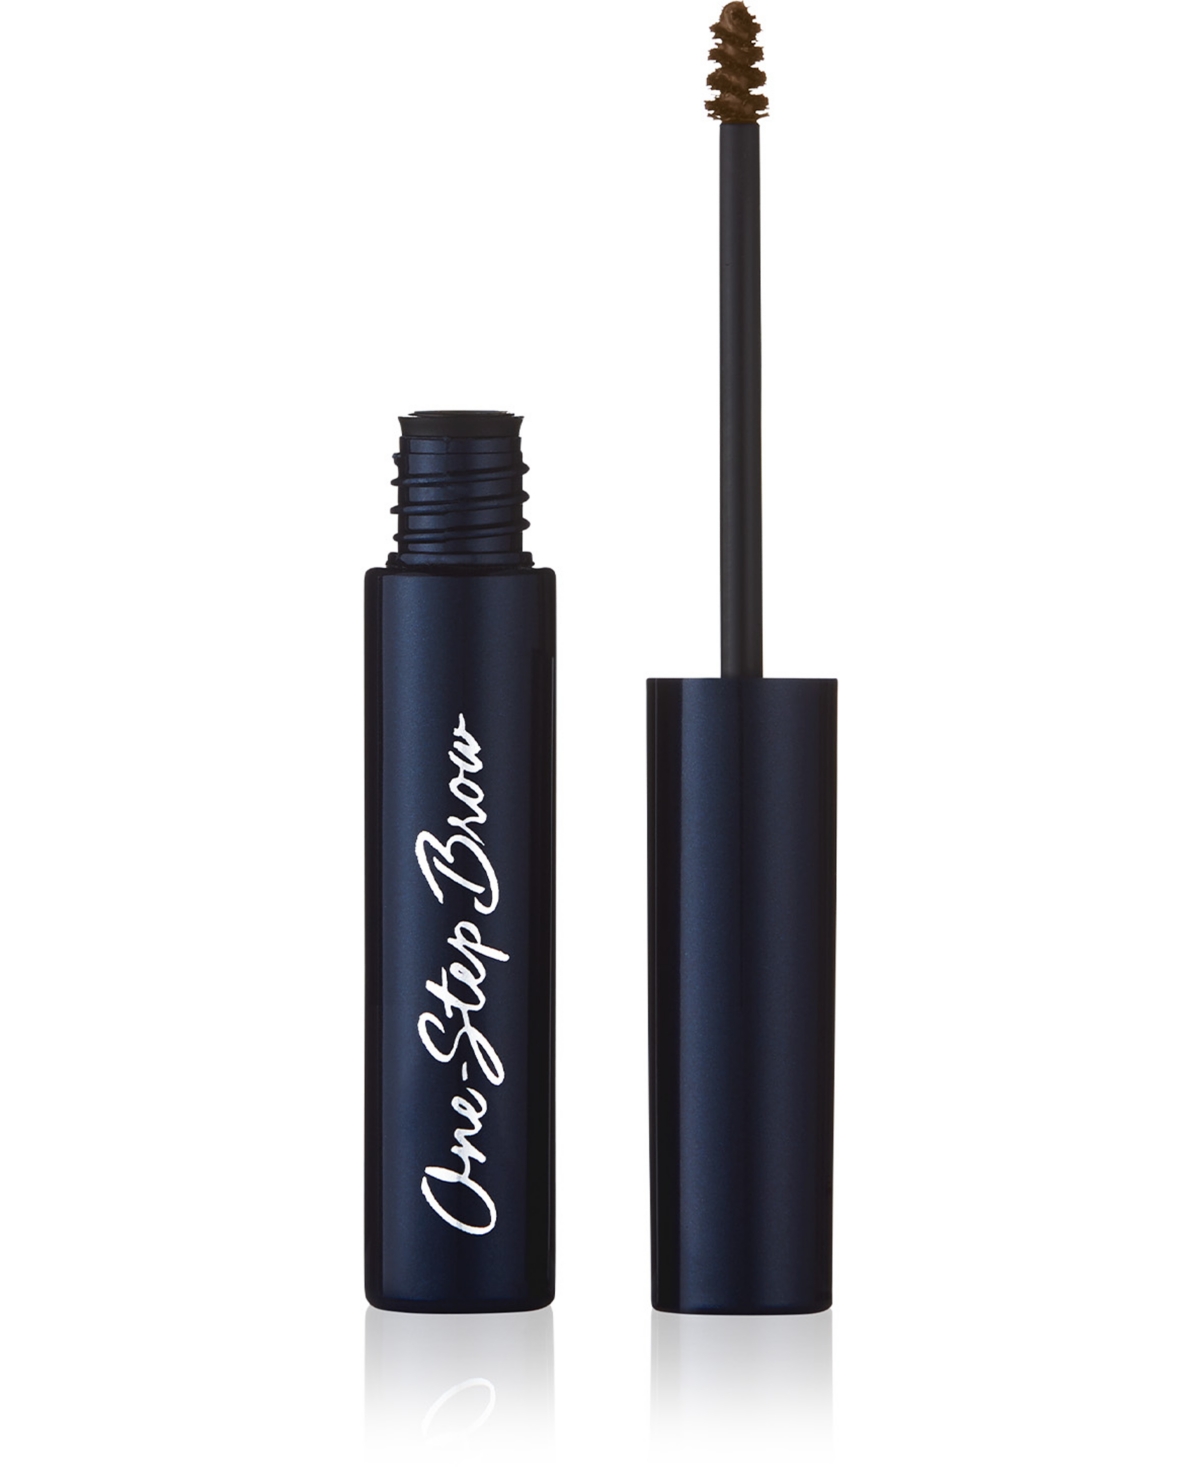 Lune+aster One-step Brow In Blonde